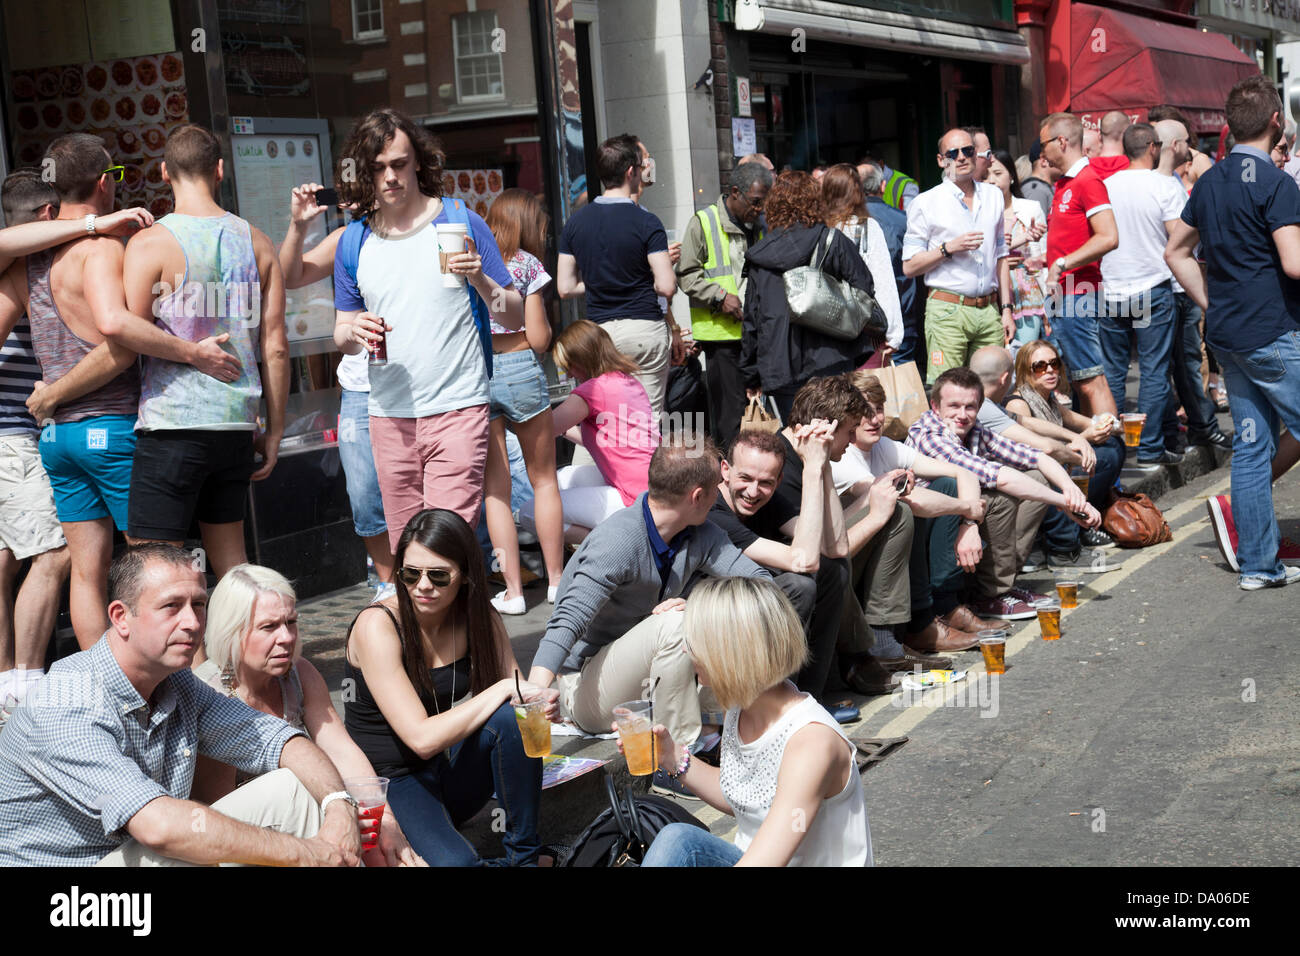 Crowds Gather on Old Compton Street during London Gay Pride - UK Stock Photo